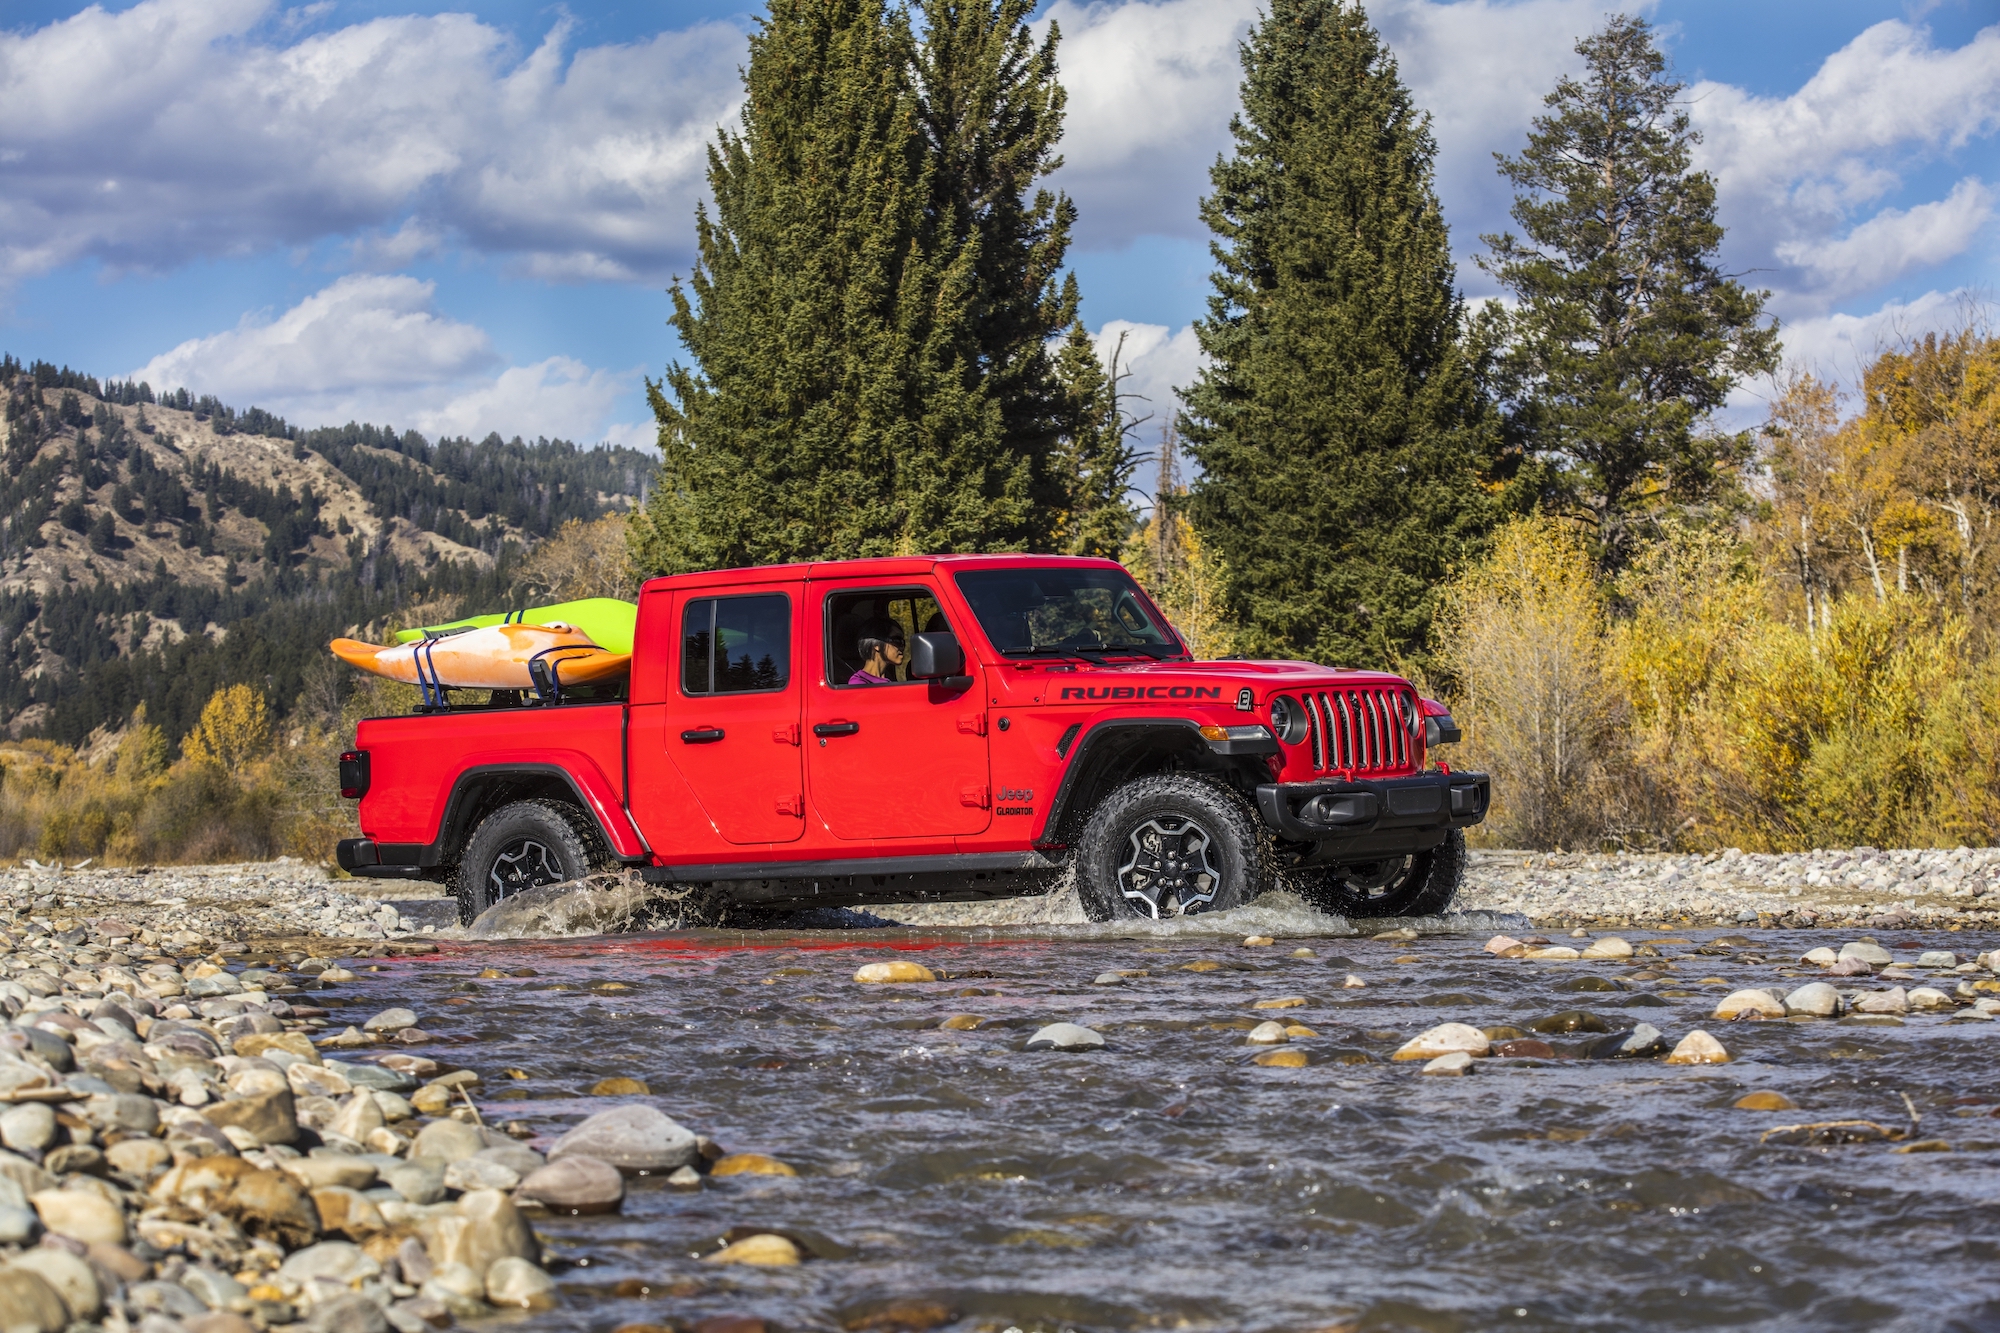 A red 2021 Jeep Gladiator Rubicon pickup truck carries kayaks in its bed while navigating a stream surrounded by pine trees and mountains